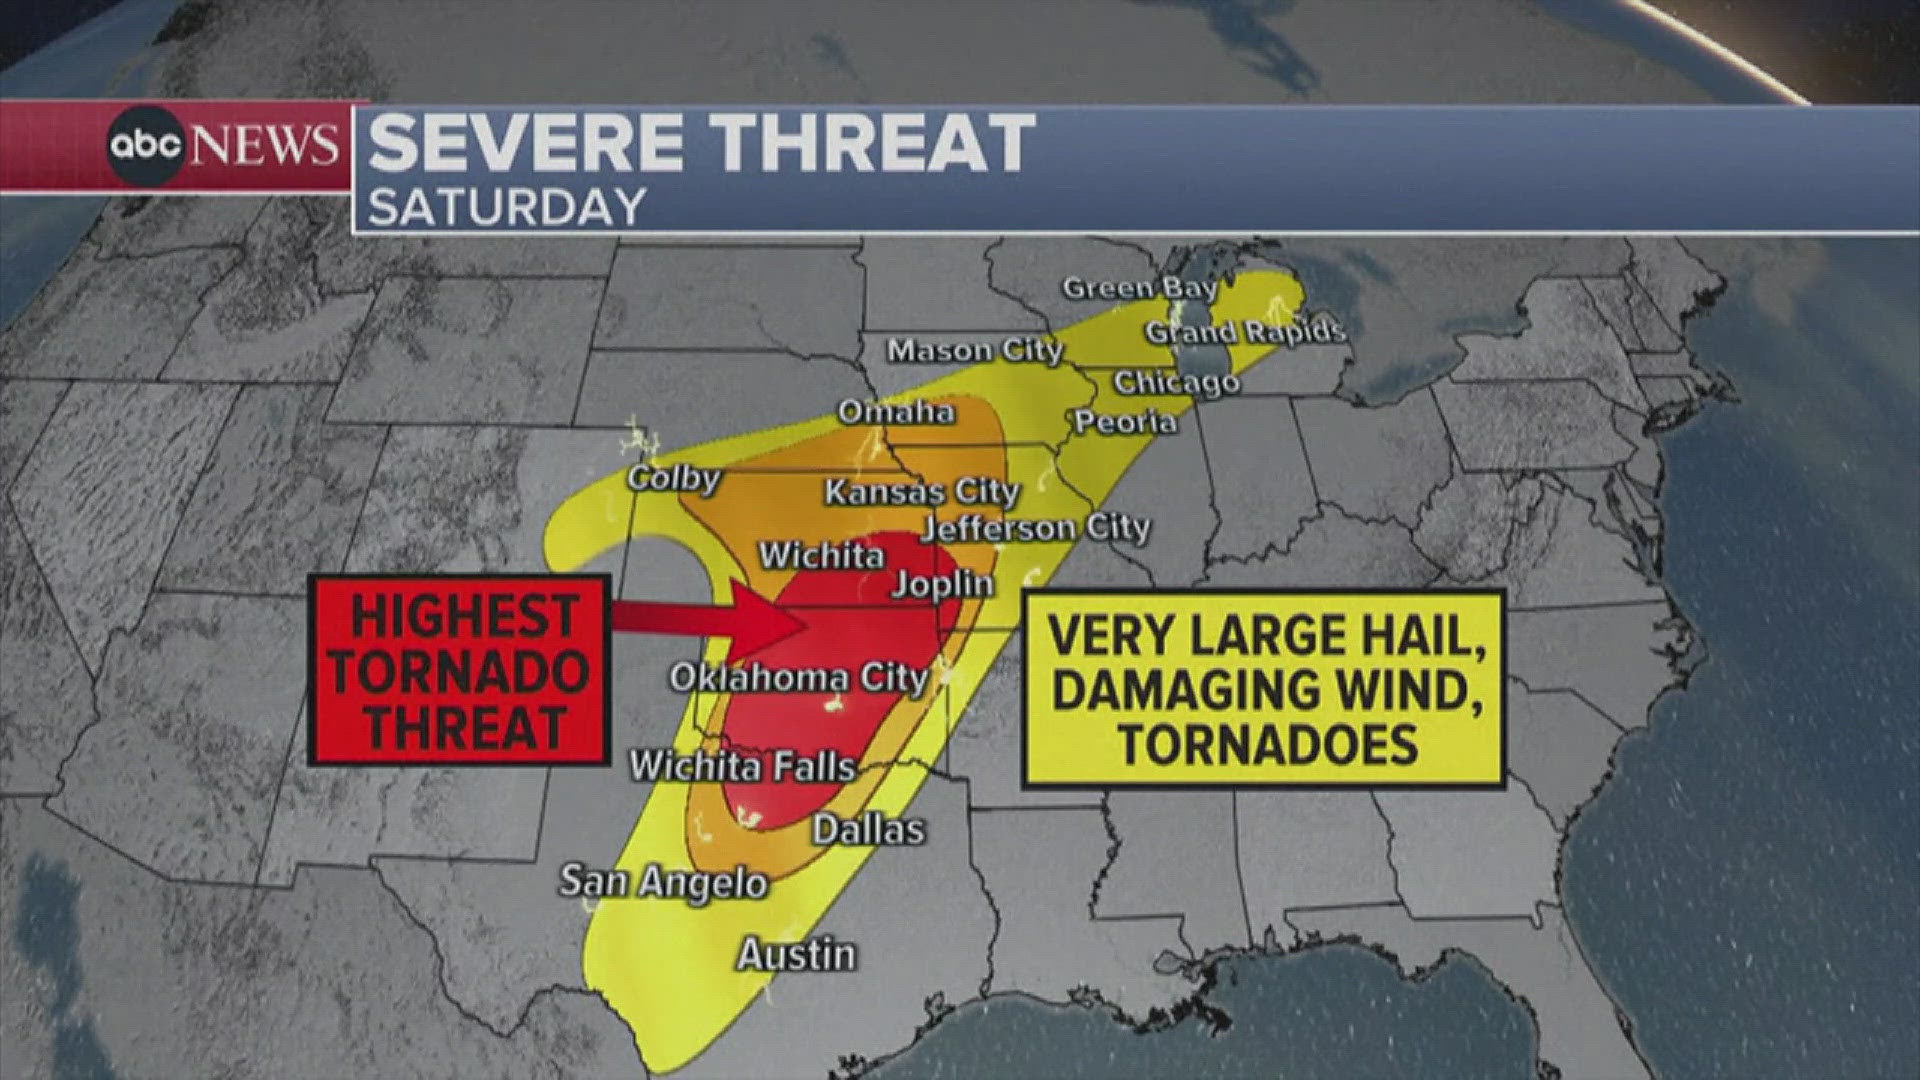 Now more storms are in the forecast from Texas to the Great Lakes